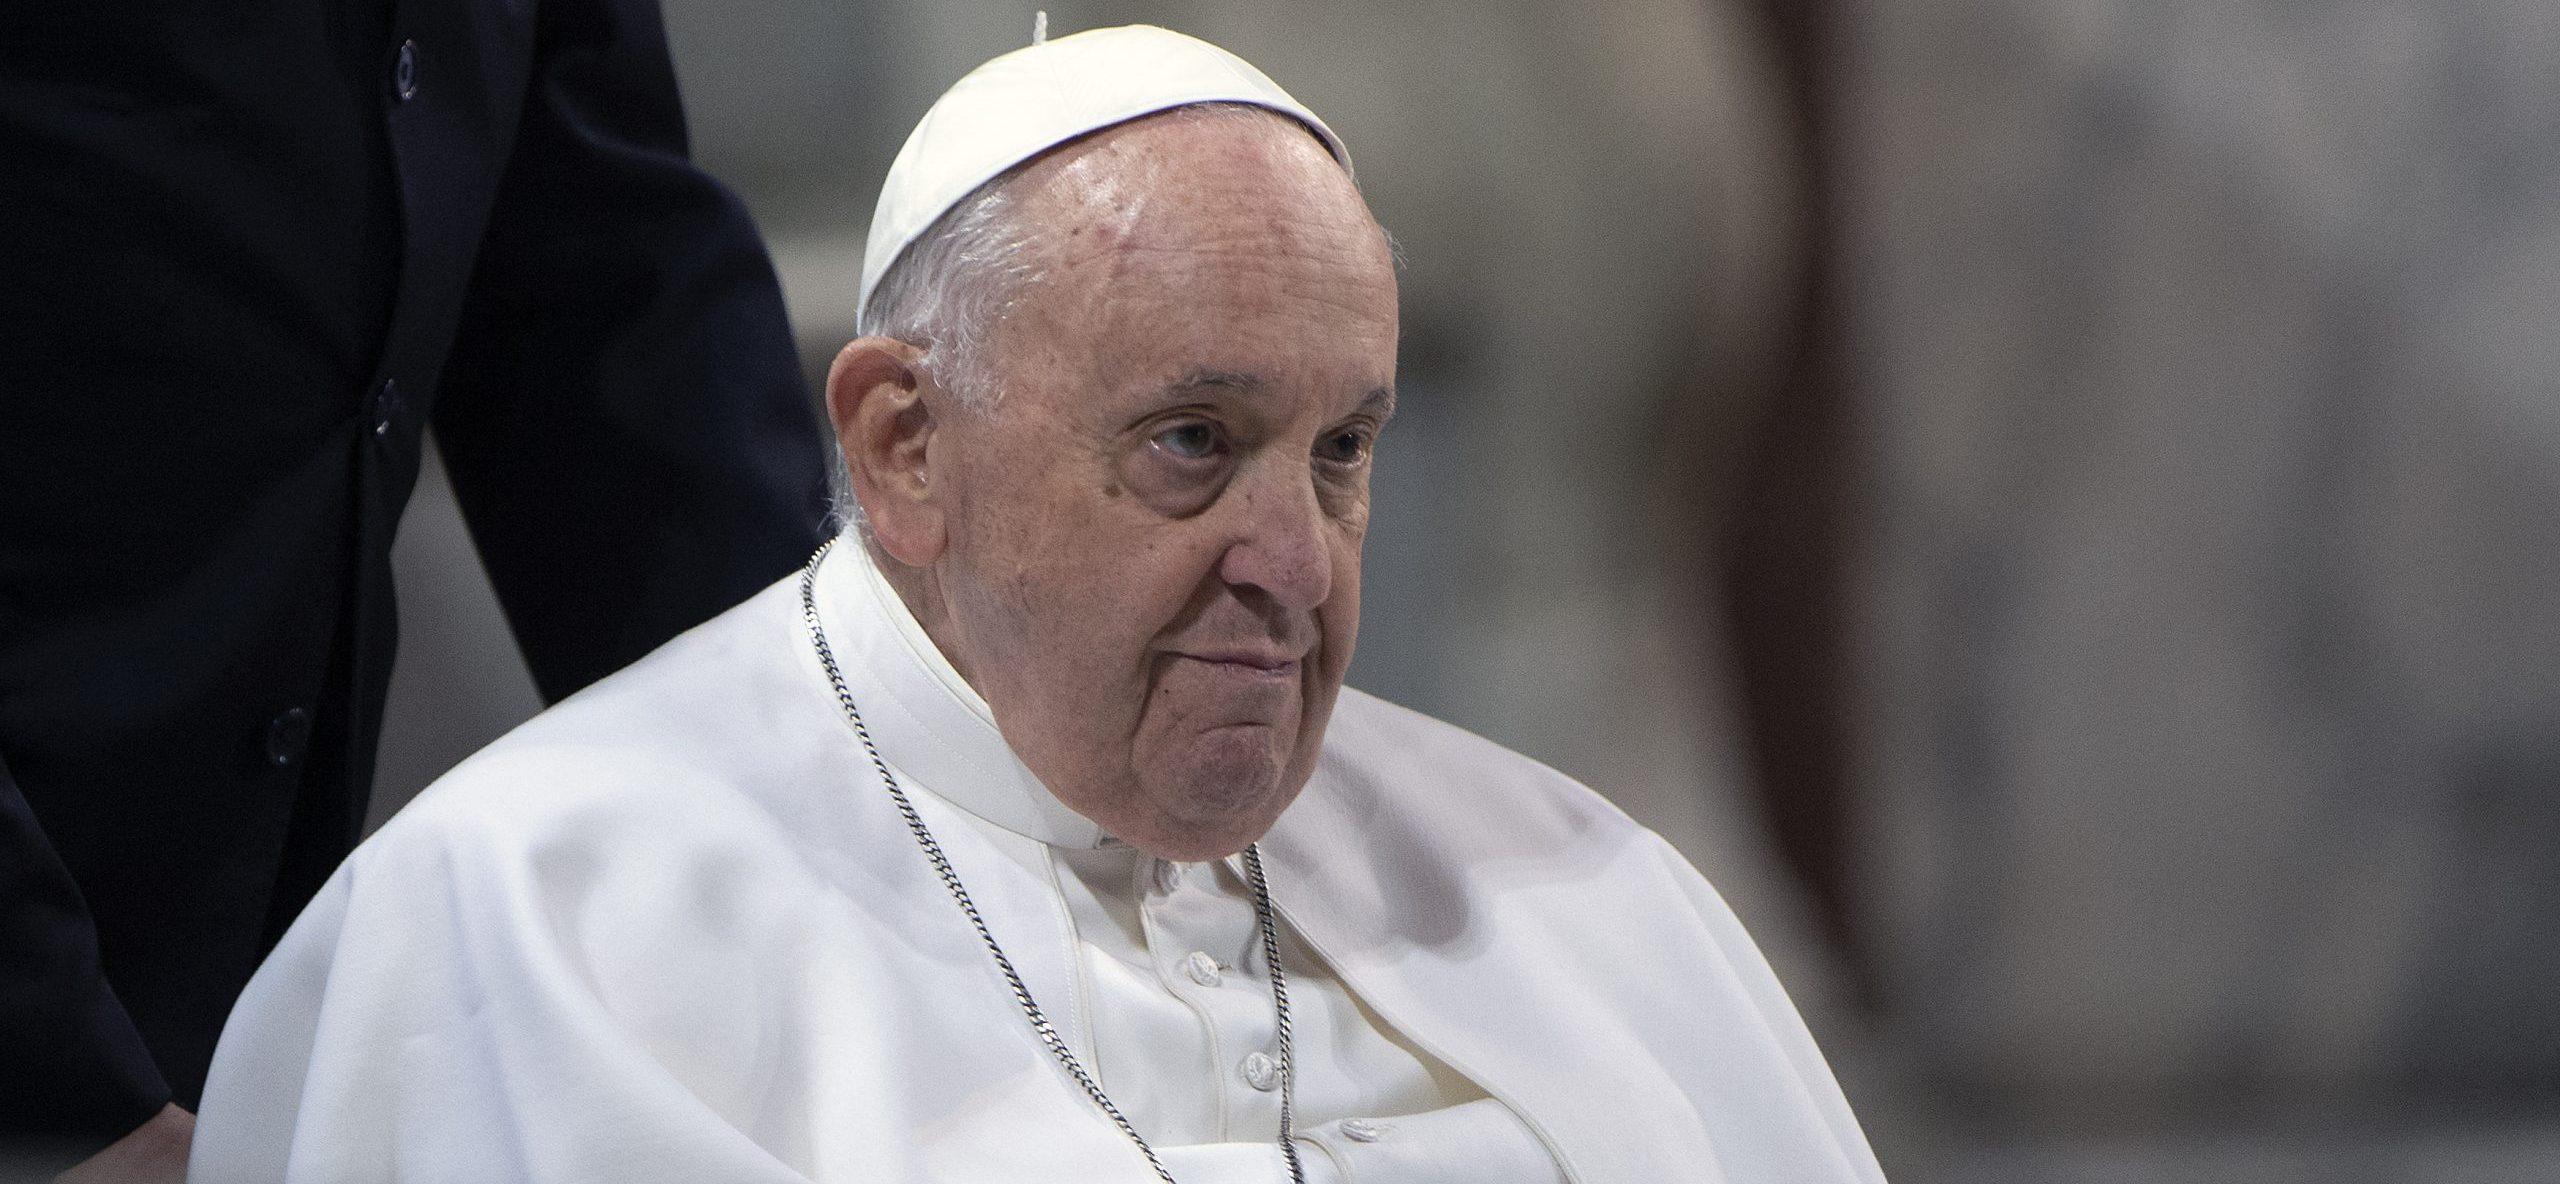 Pope Francis’ Approval Of Marital Blessings For Same-Sex Couples Met With Positive Feedback